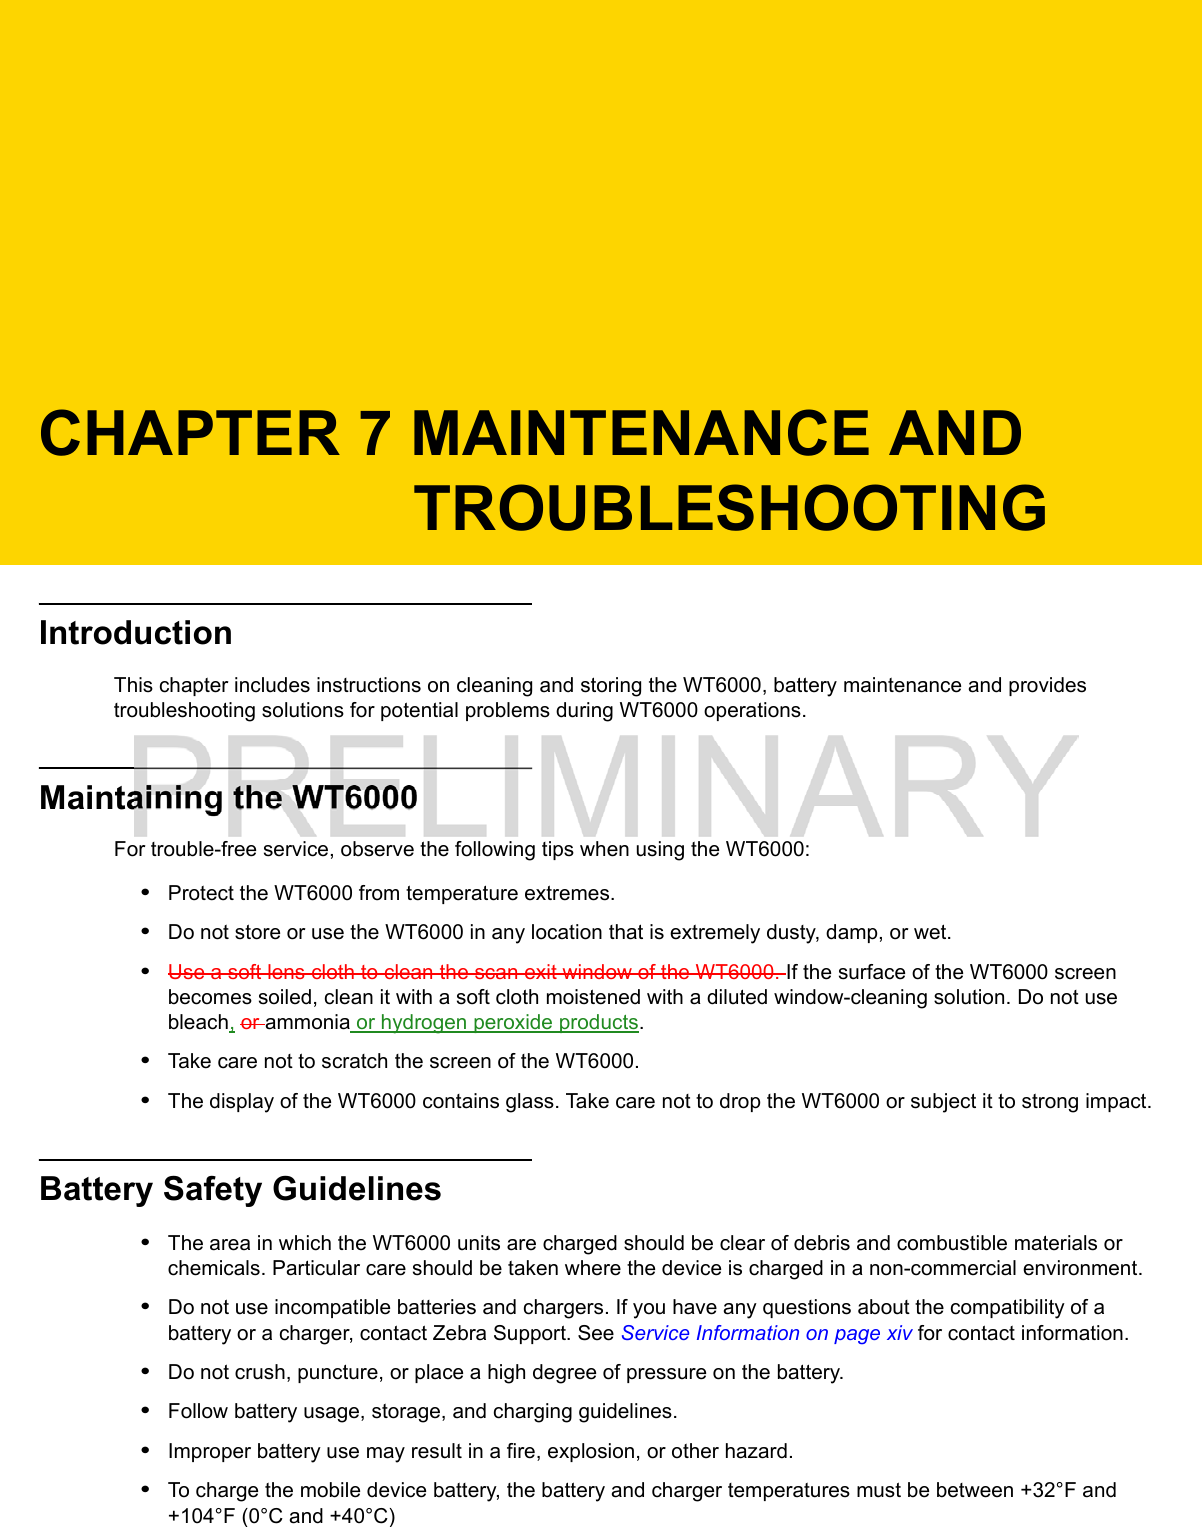 CHAPTER 7 MAINTENANCE AND TROUBLESHOOTINGIntroductionThis chapter includes instructions on cleaning and storing the WT6000, battery maintenance and provides troubleshooting solutions for potential problems during WT6000 operations.Maintaining the WT6000For trouble-free service, observe the following tips when using the WT6000:•Protect the WT6000 from temperature extremes.•Do not store or use the WT6000 in any location that is extremely dusty, damp, or wet.•Use a soft lens cloth to clean the scan exit window of the WT6000. If the surface of the WT6000 screen becomes soiled, clean it with a soft cloth moistened with a diluted window-cleaning solution. Do not use bleach, or ammonia or hydrogen peroxide products.•Take care not to scratch the screen of the WT6000.•The display of the WT6000 contains glass. Take care not to drop the WT6000 or subject it to strong impact.Battery Safety Guidelines•The area in which the WT6000 units are charged should be clear of debris and combustible materials or chemicals. Particular care should be taken where the device is charged in a non-commercial environment.•Do not use incompatible batteries and chargers. If you have any questions about the compatibility of a battery or a charger, contact Zebra Support. See Service Information on page xiv for contact information.•Do not crush, puncture, or place a high degree of pressure on the battery.•Follow battery usage, storage, and charging guidelines.•Improper battery use may result in a fire, explosion, or other hazard.•To charge the mobile device battery, the battery and charger temperatures must be between +32°F and +104°F (0°C and +40°C) 